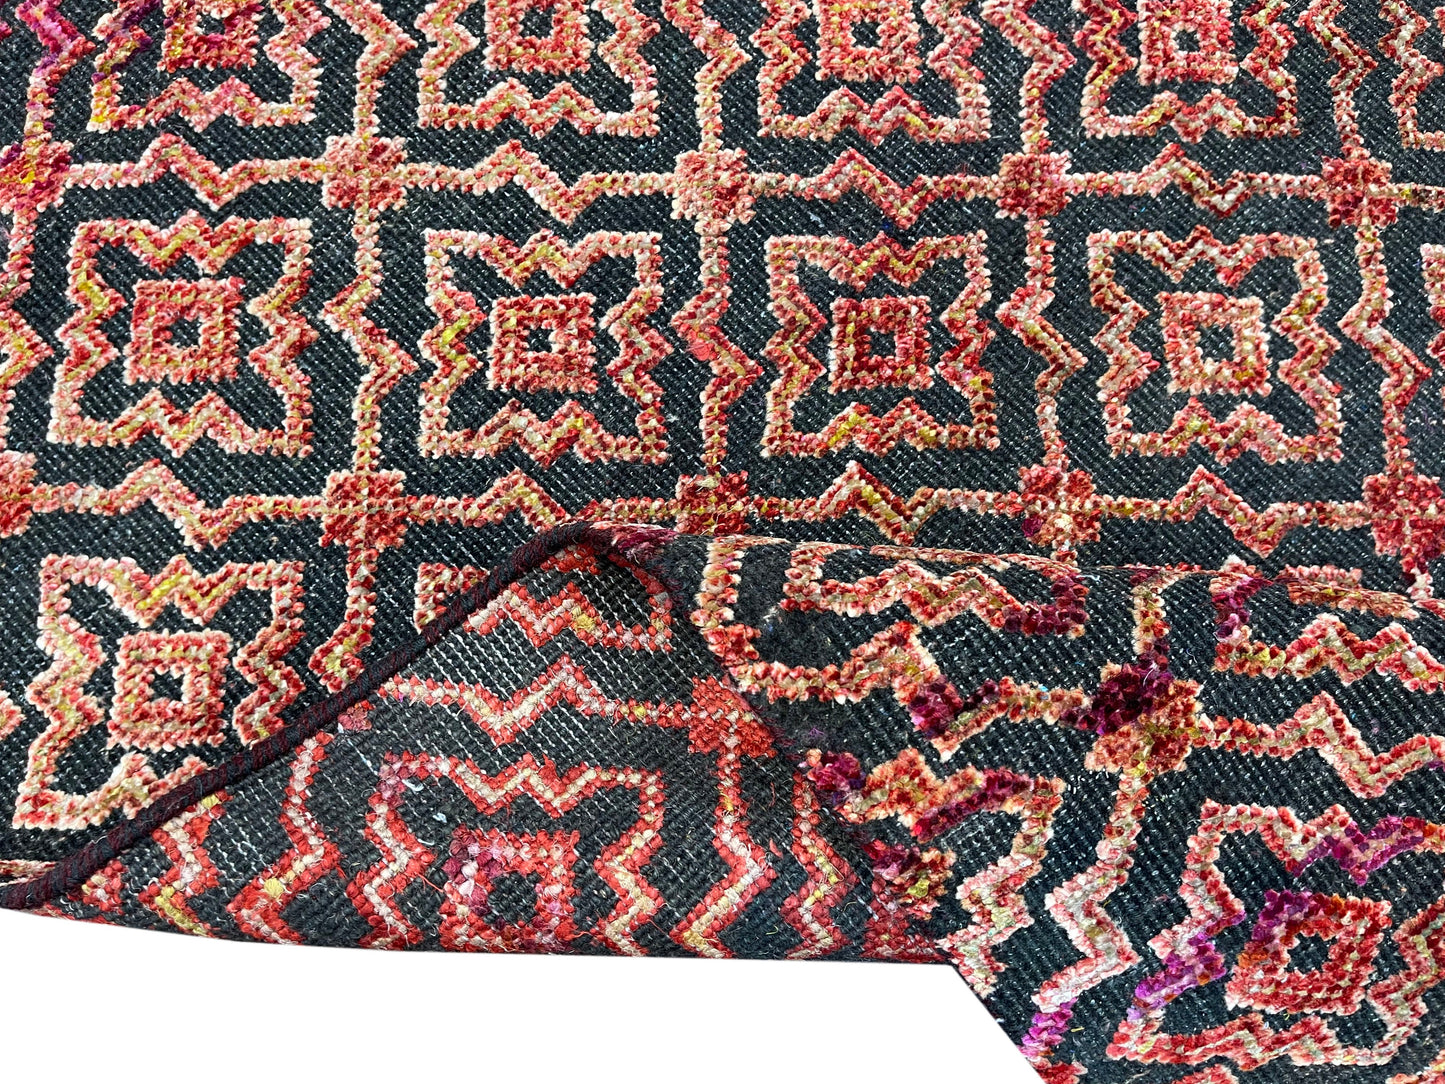 Get trendy with Contemporary Handknotted Runner Rug Red and Black 3X11.9ft 92x357cms - Runner Rugs available at Jaipur Oriental Rugs. Grab yours for $2115.00 today!